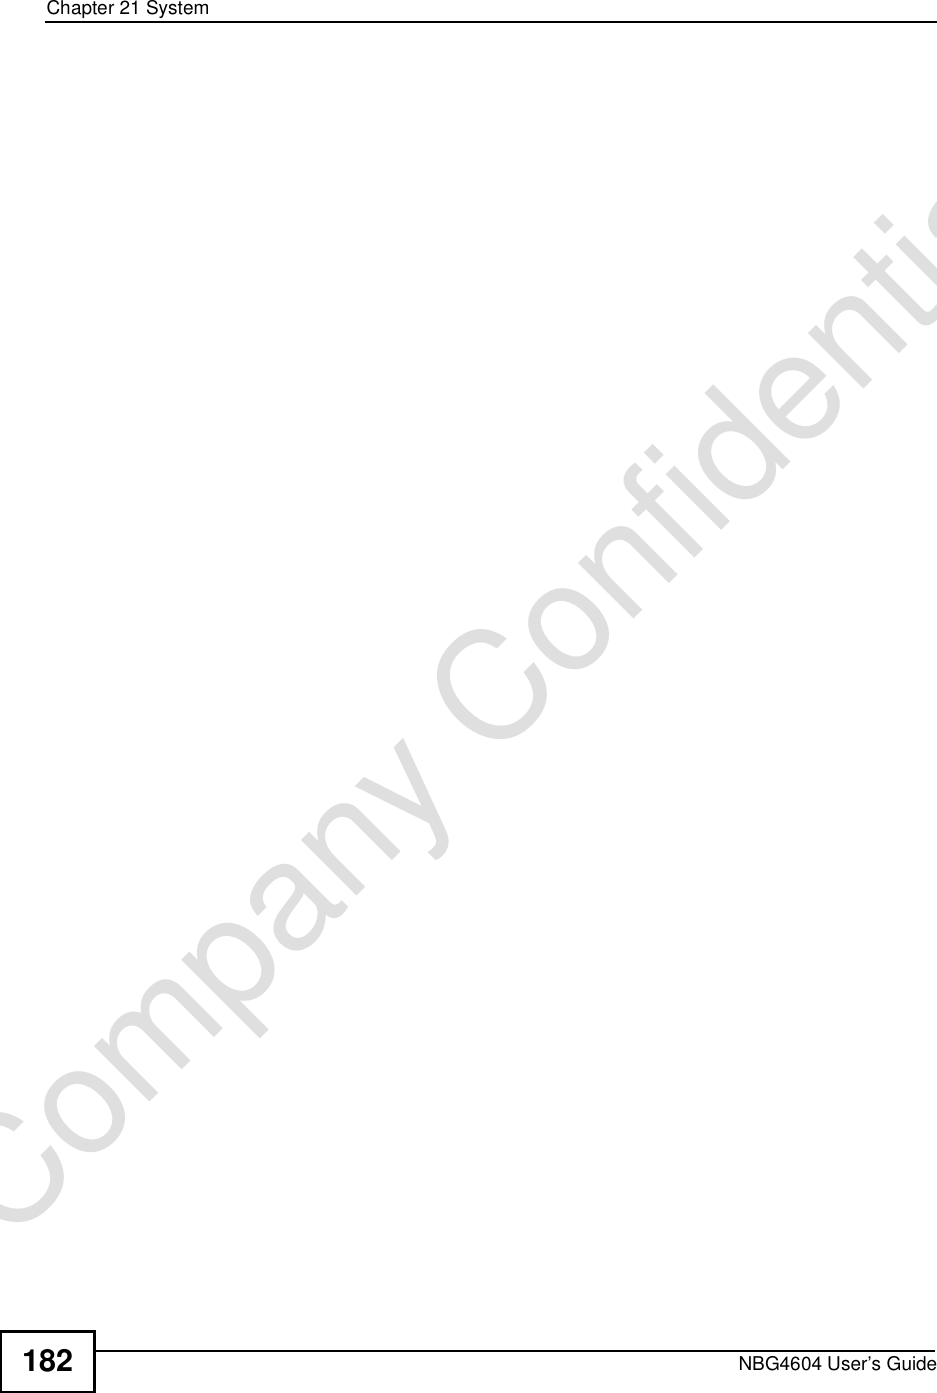 Chapter 21SystemNBG4604 User’s Guide182Company Confidential